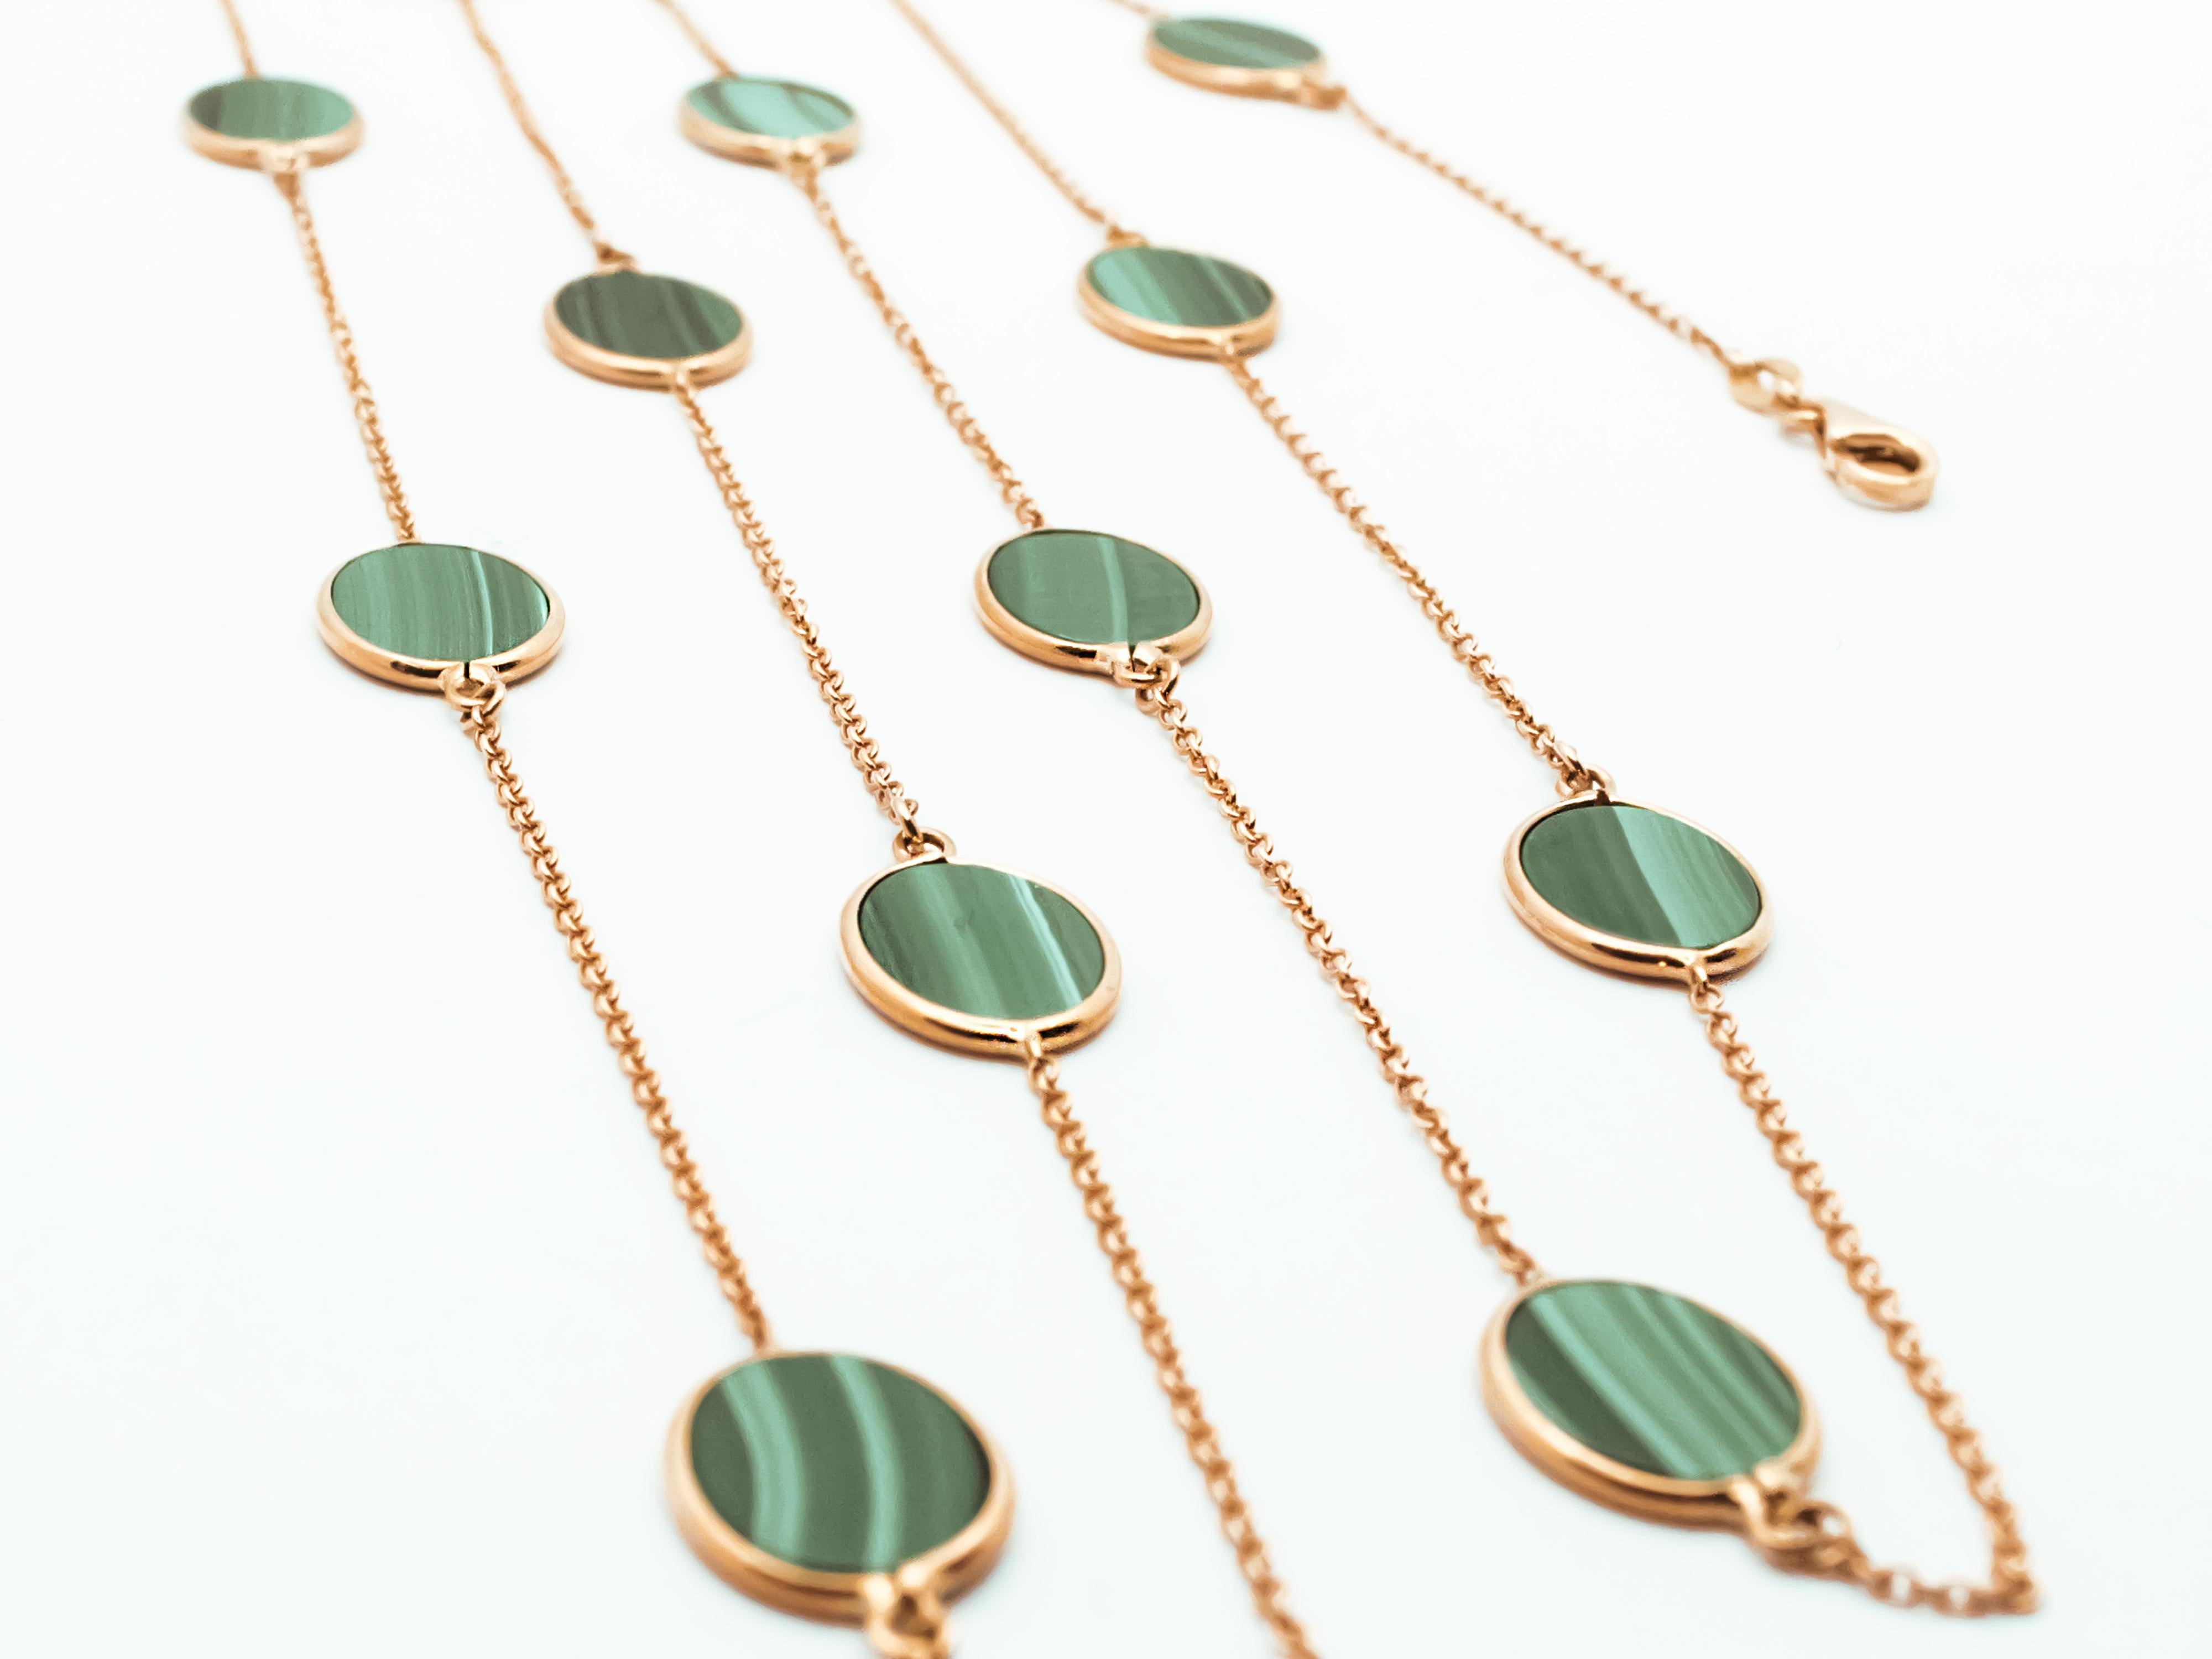 A long necklace in 18 kt rose gold and malachite.
Its total weight is 10.1 gr
The necklace is 80 cm long that can be worn either long or double twisted.
By customizing its length, it can also be worn as a multi-turn bracelet.
Oval-cut malachite is